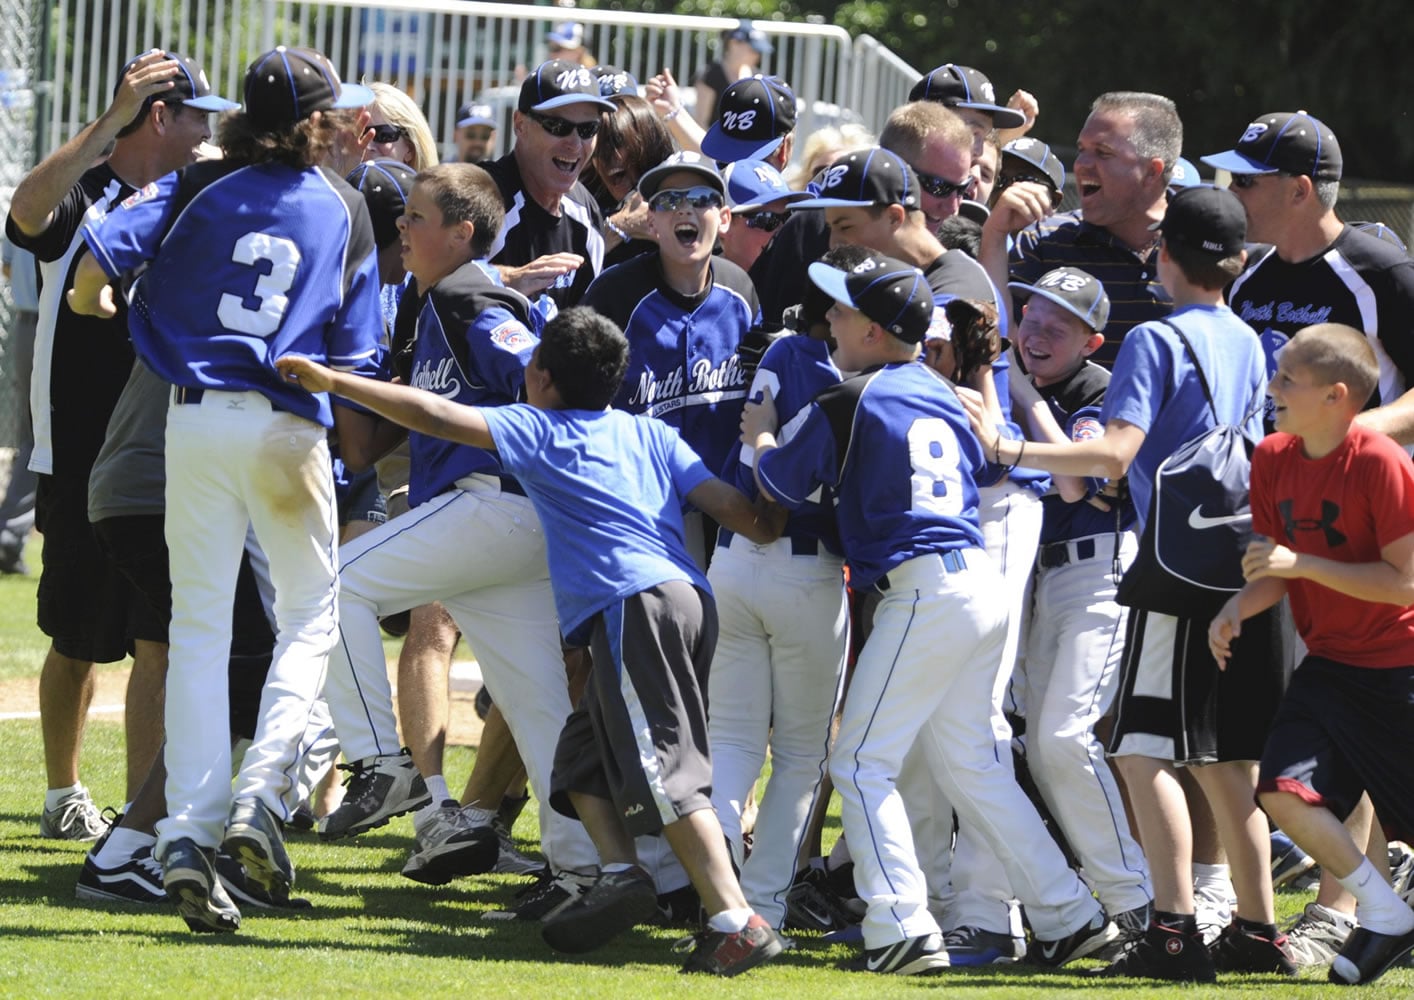 North Bothell claims Washington state Little League title The Columbian